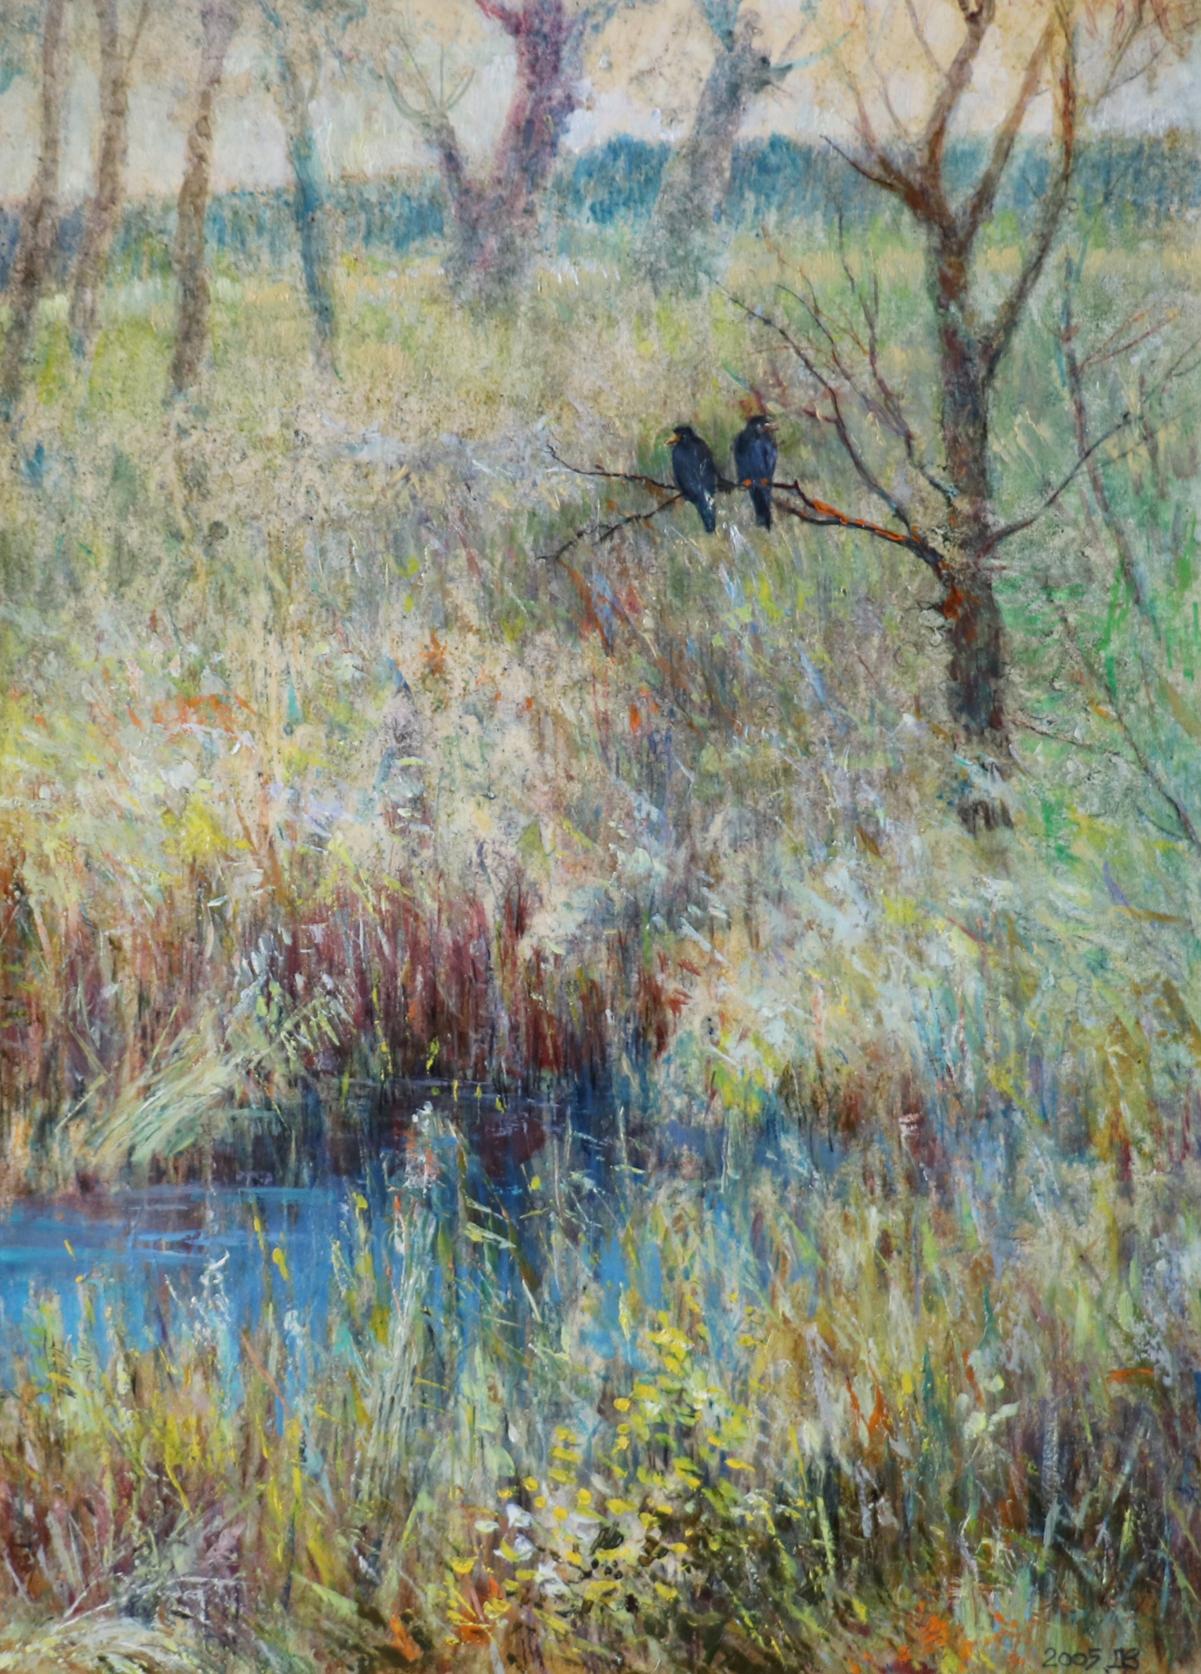 "Autumn Clearing" by Anatolii Duhnevich, an oil painting capturing the serene beauty.